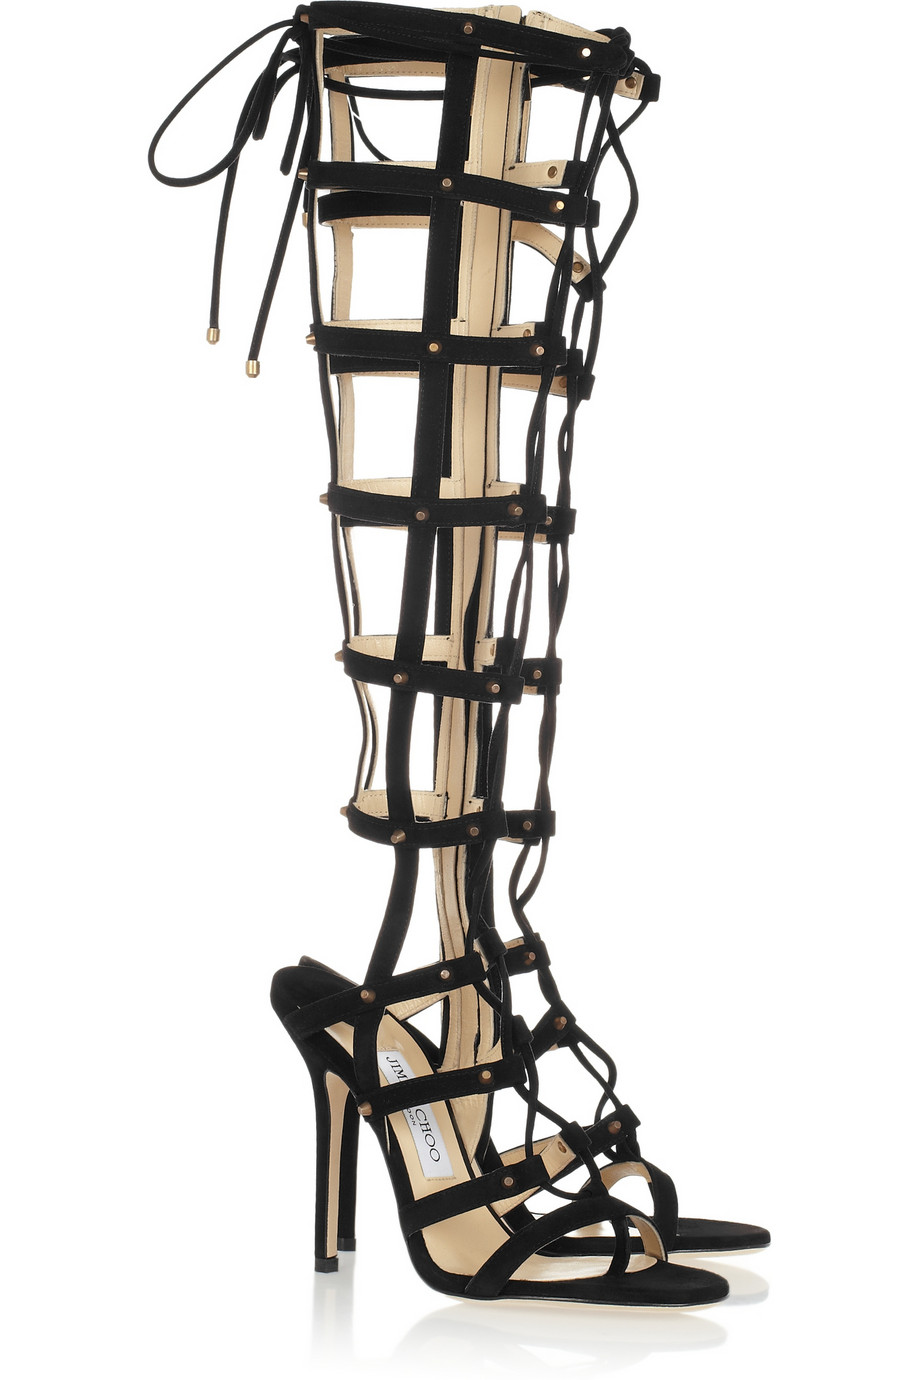 DIARY OF A CLOTHESHORSE: TODAY'S SHOES ARE FROM JIMMY CHOO